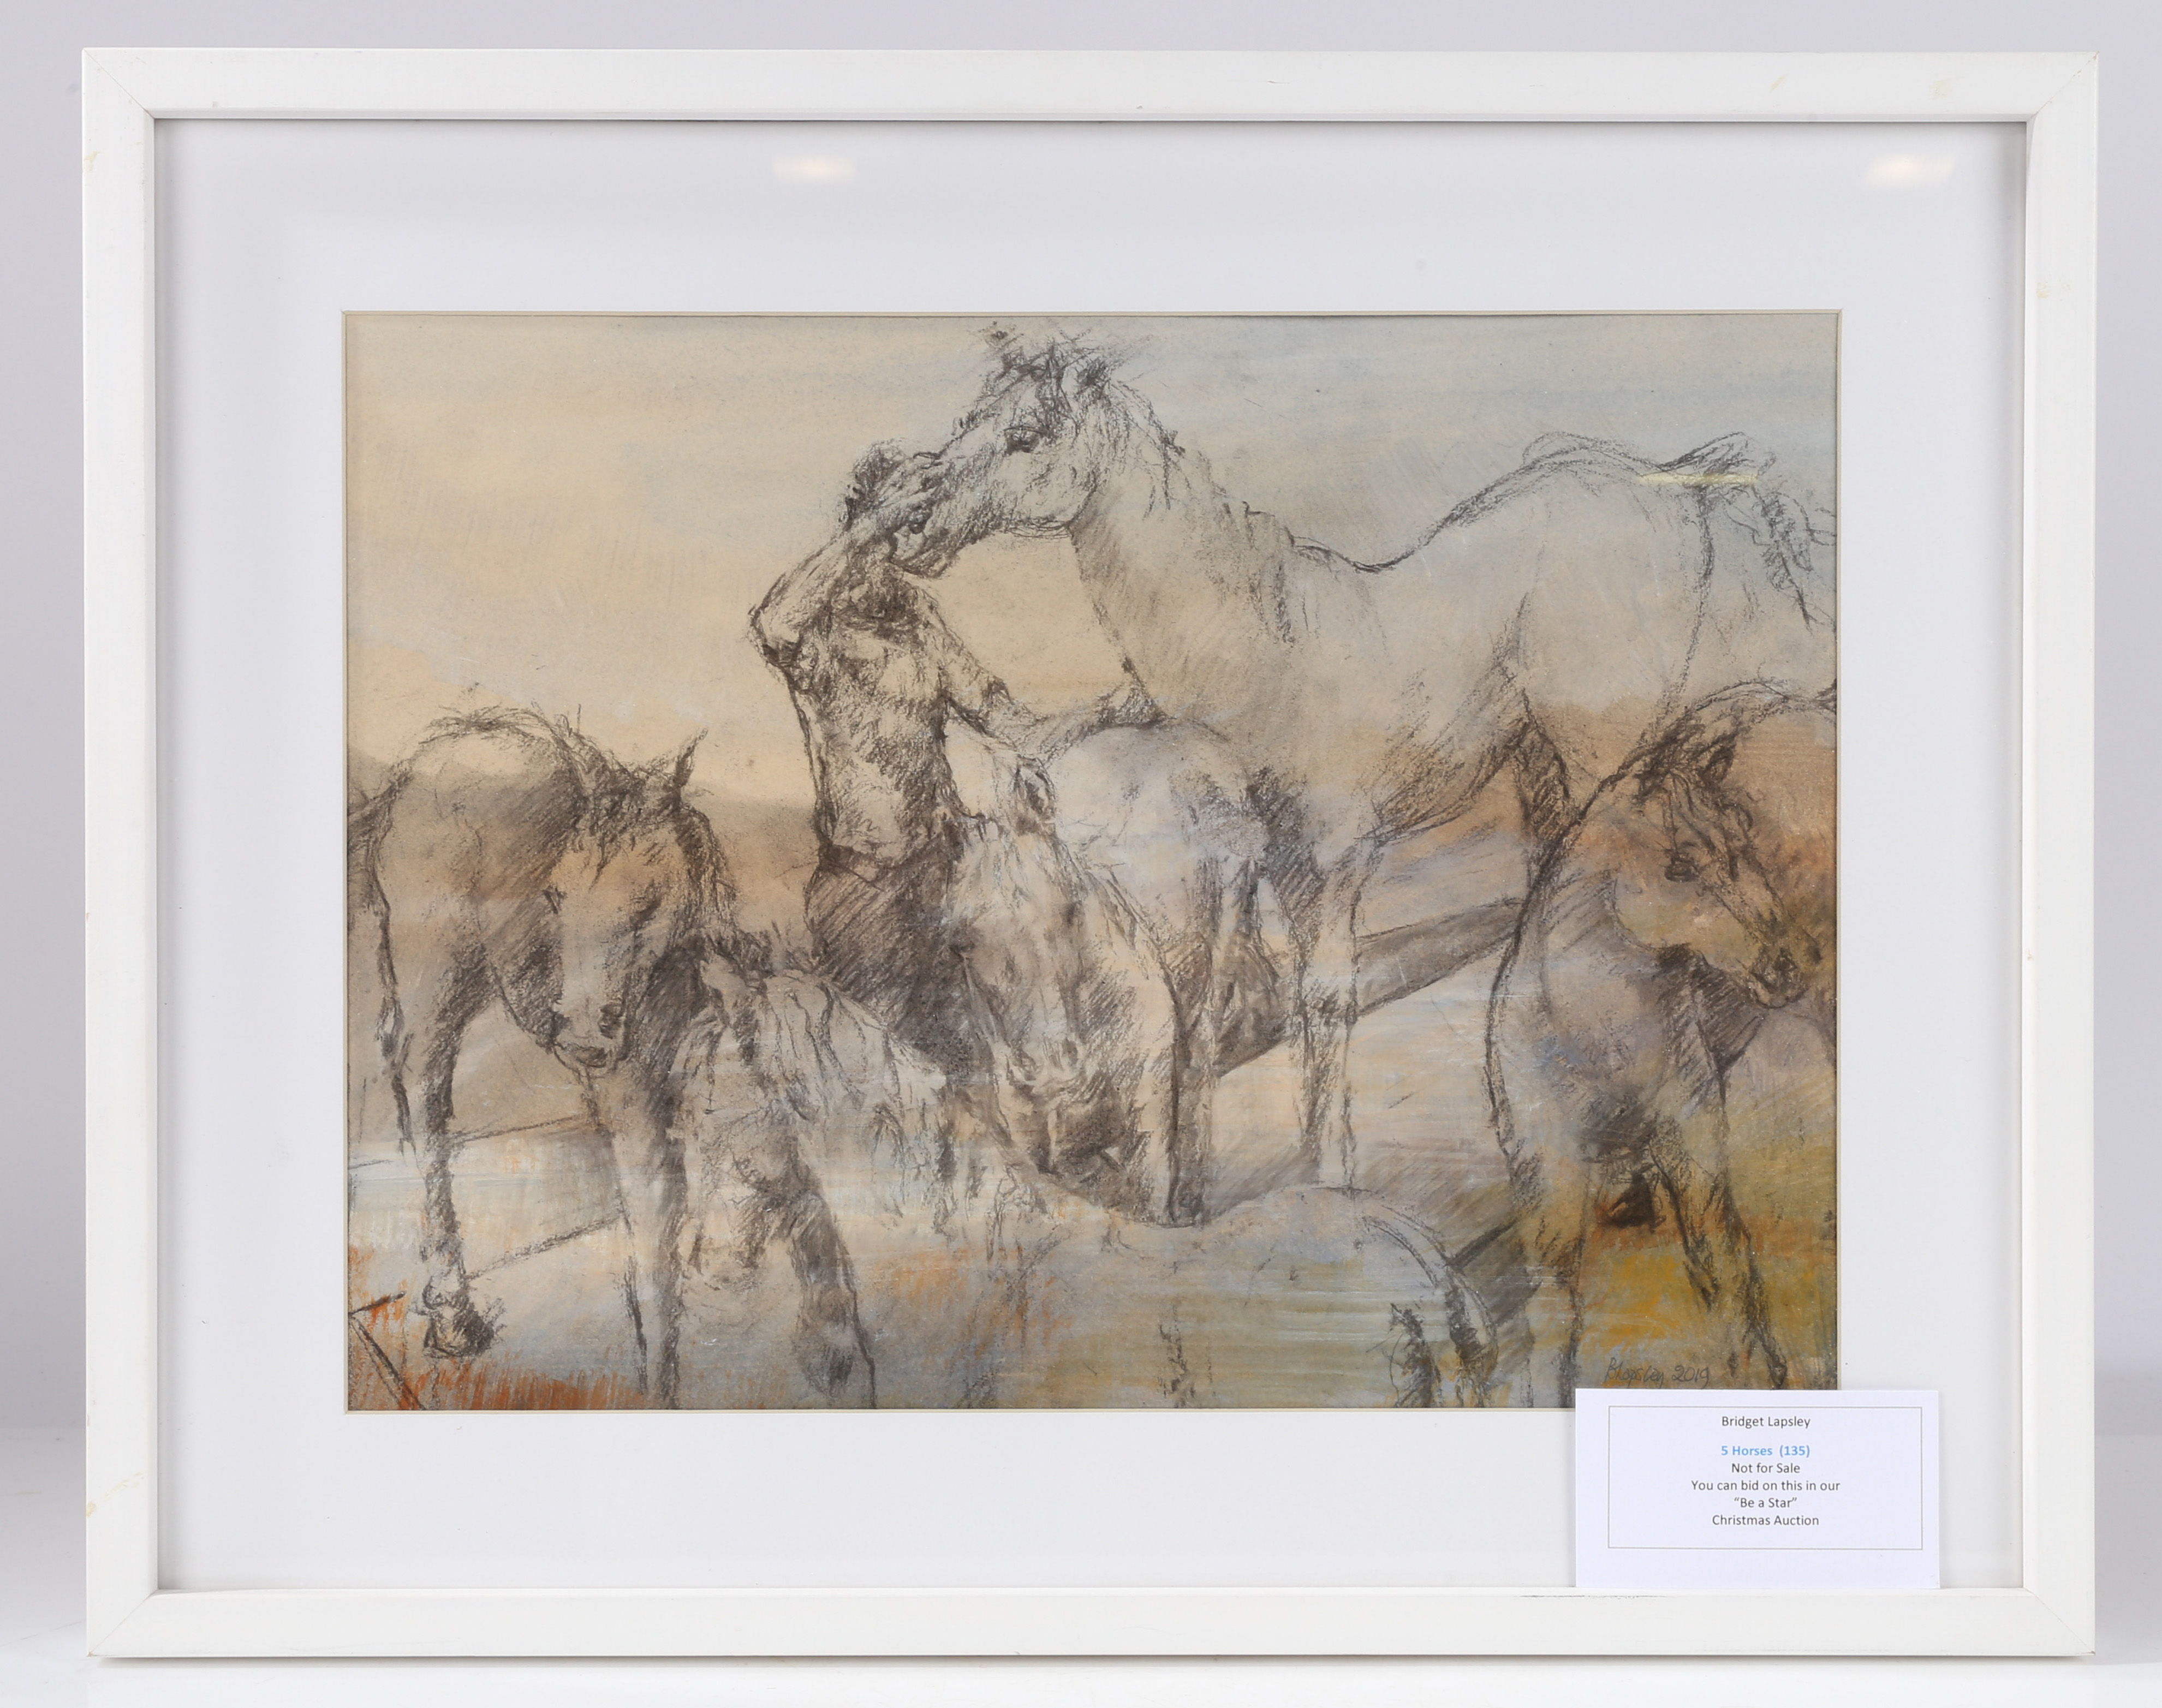 Bridget Lapsley paintings, "5 Horses" Charcoal housed within white and glazed frame We would like to